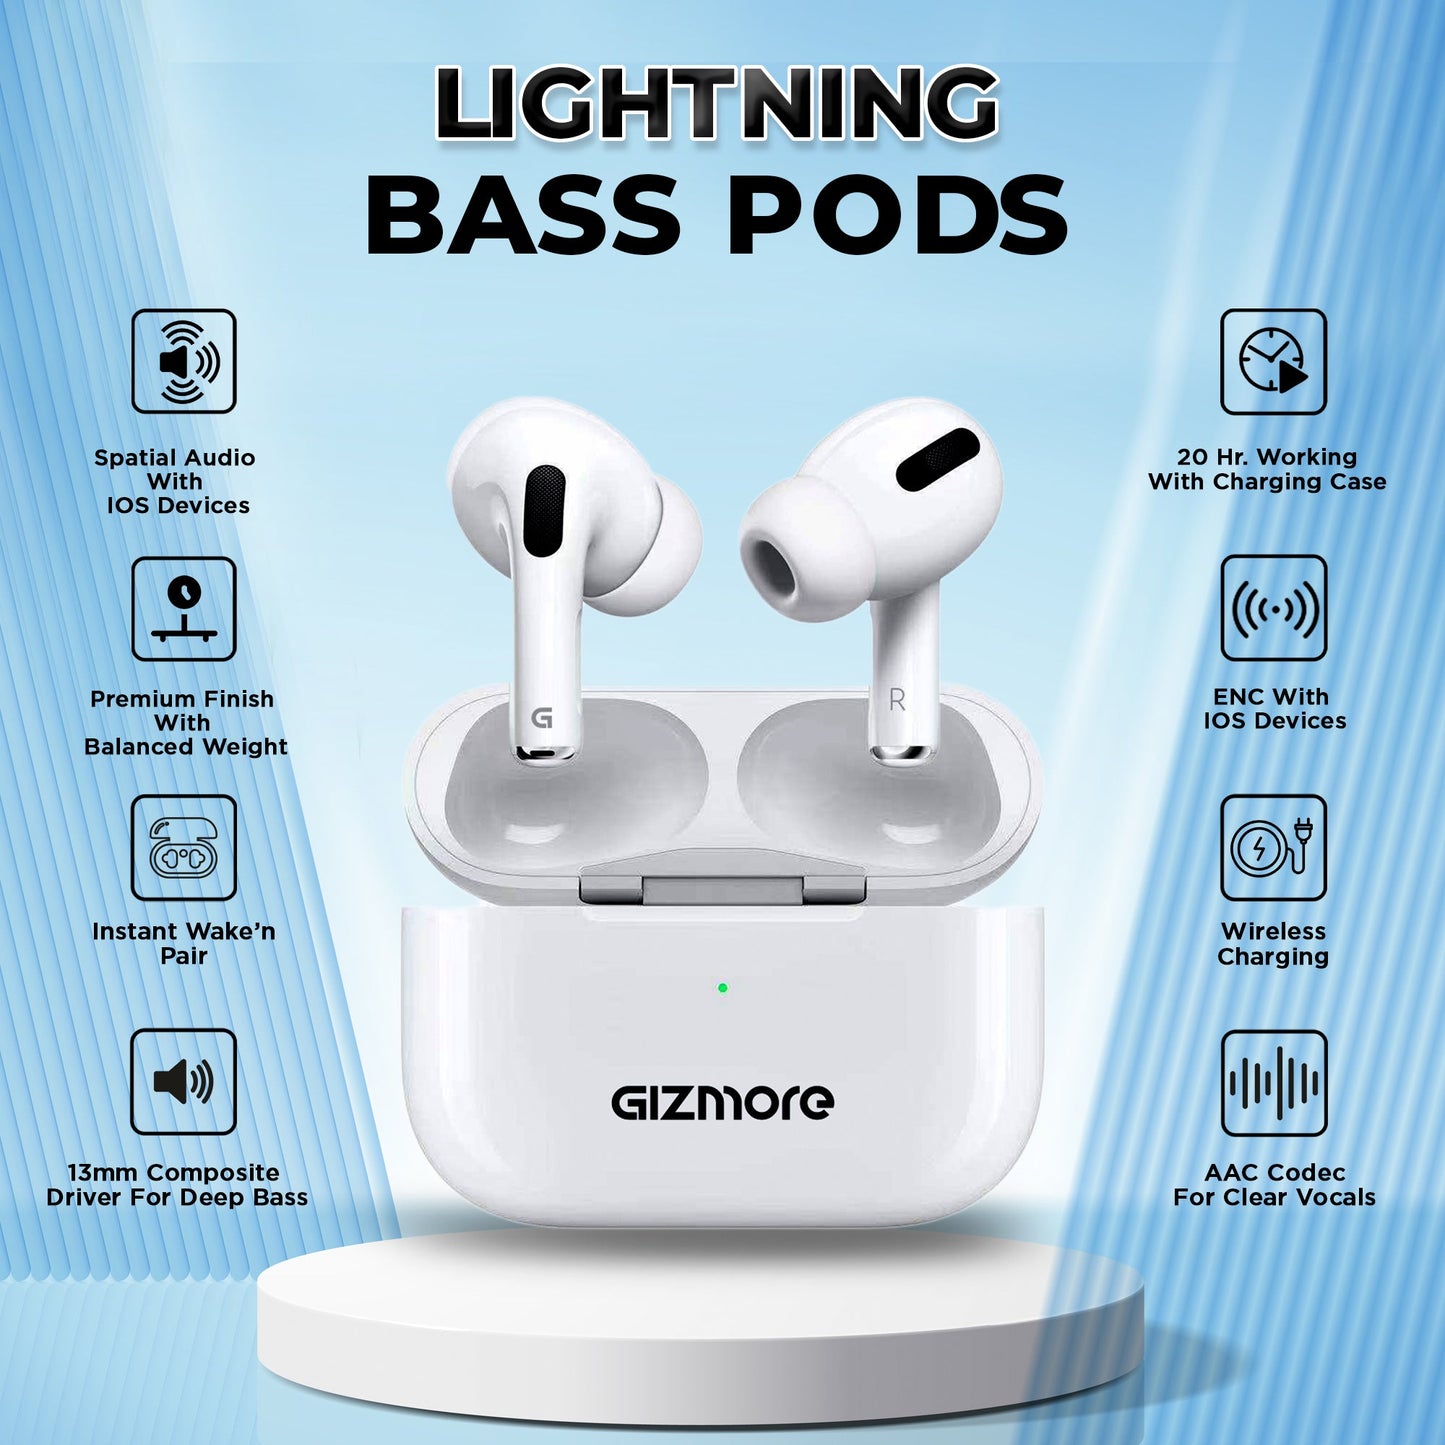 GIZMORE 871 RAGA TWS In-Ear Earbuds Wireless Charging with 20 Hours Playtime  Insta Wake N Pair Bluetooth V5.3 13mm Bass Drivers  Sweat  Water Resistant  Touch Controls  Voice Assistant Earbuds